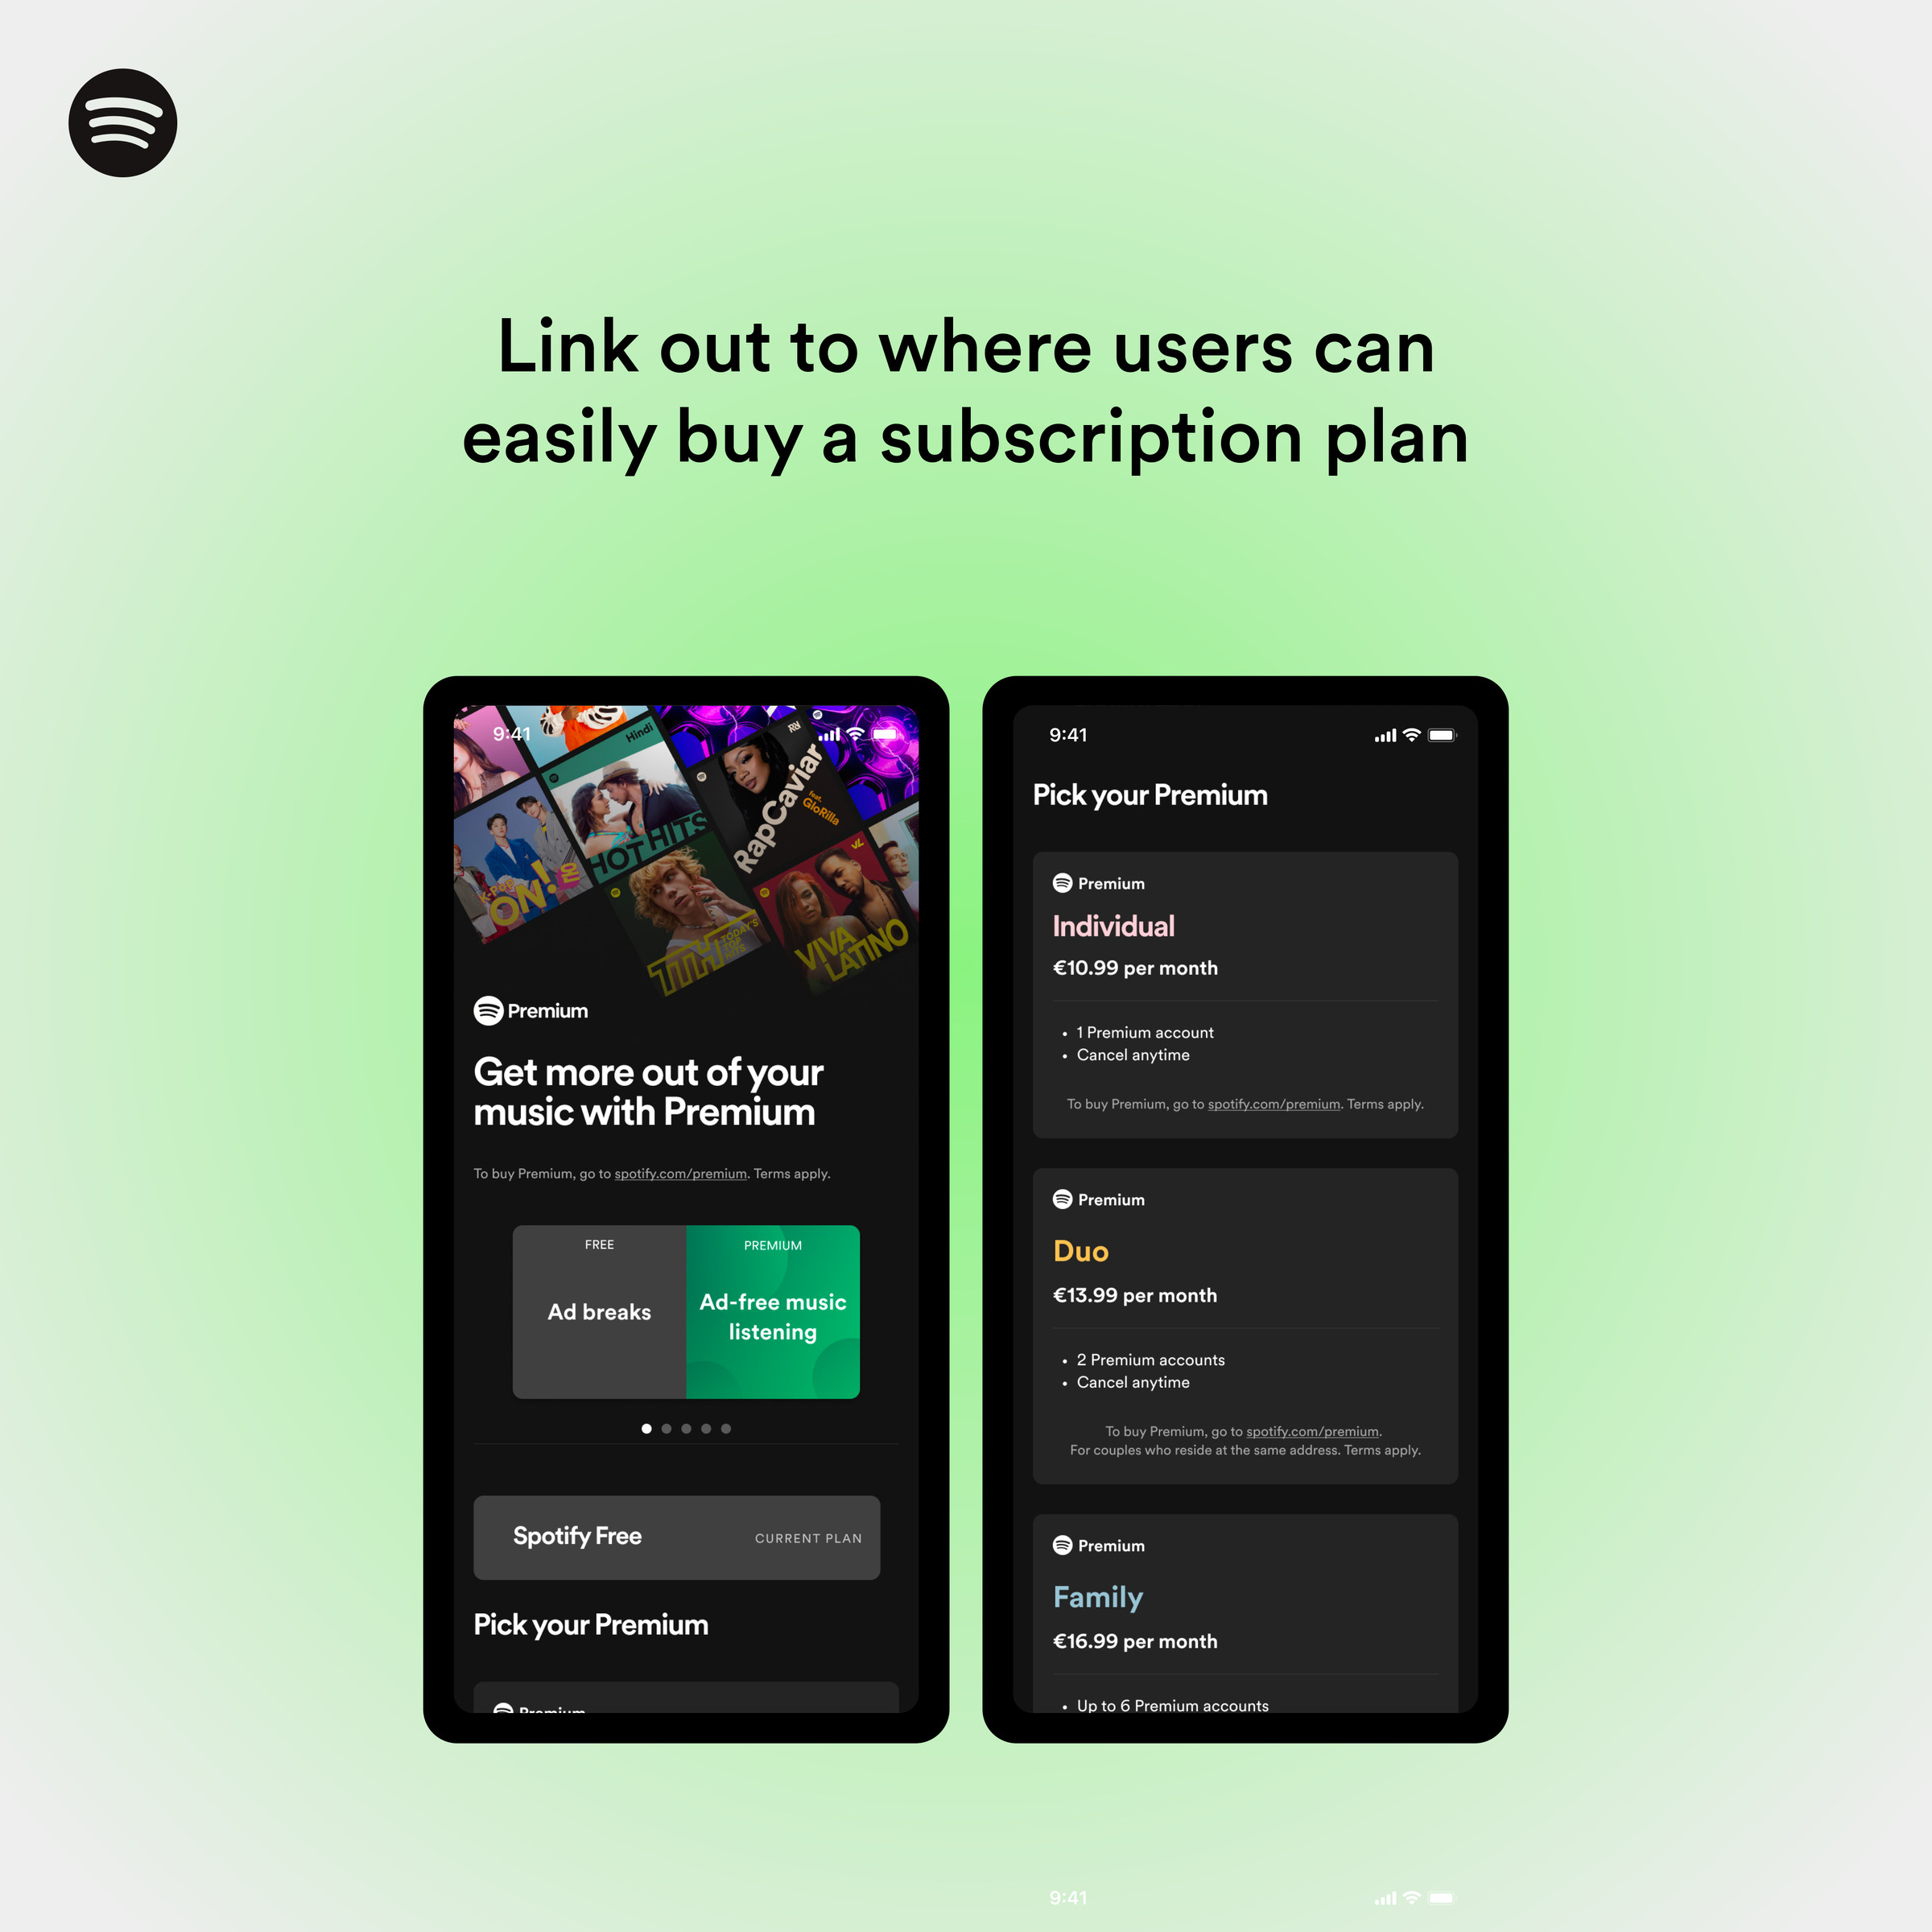 Spotify’s update. includes pricing information and links to subscriptions.